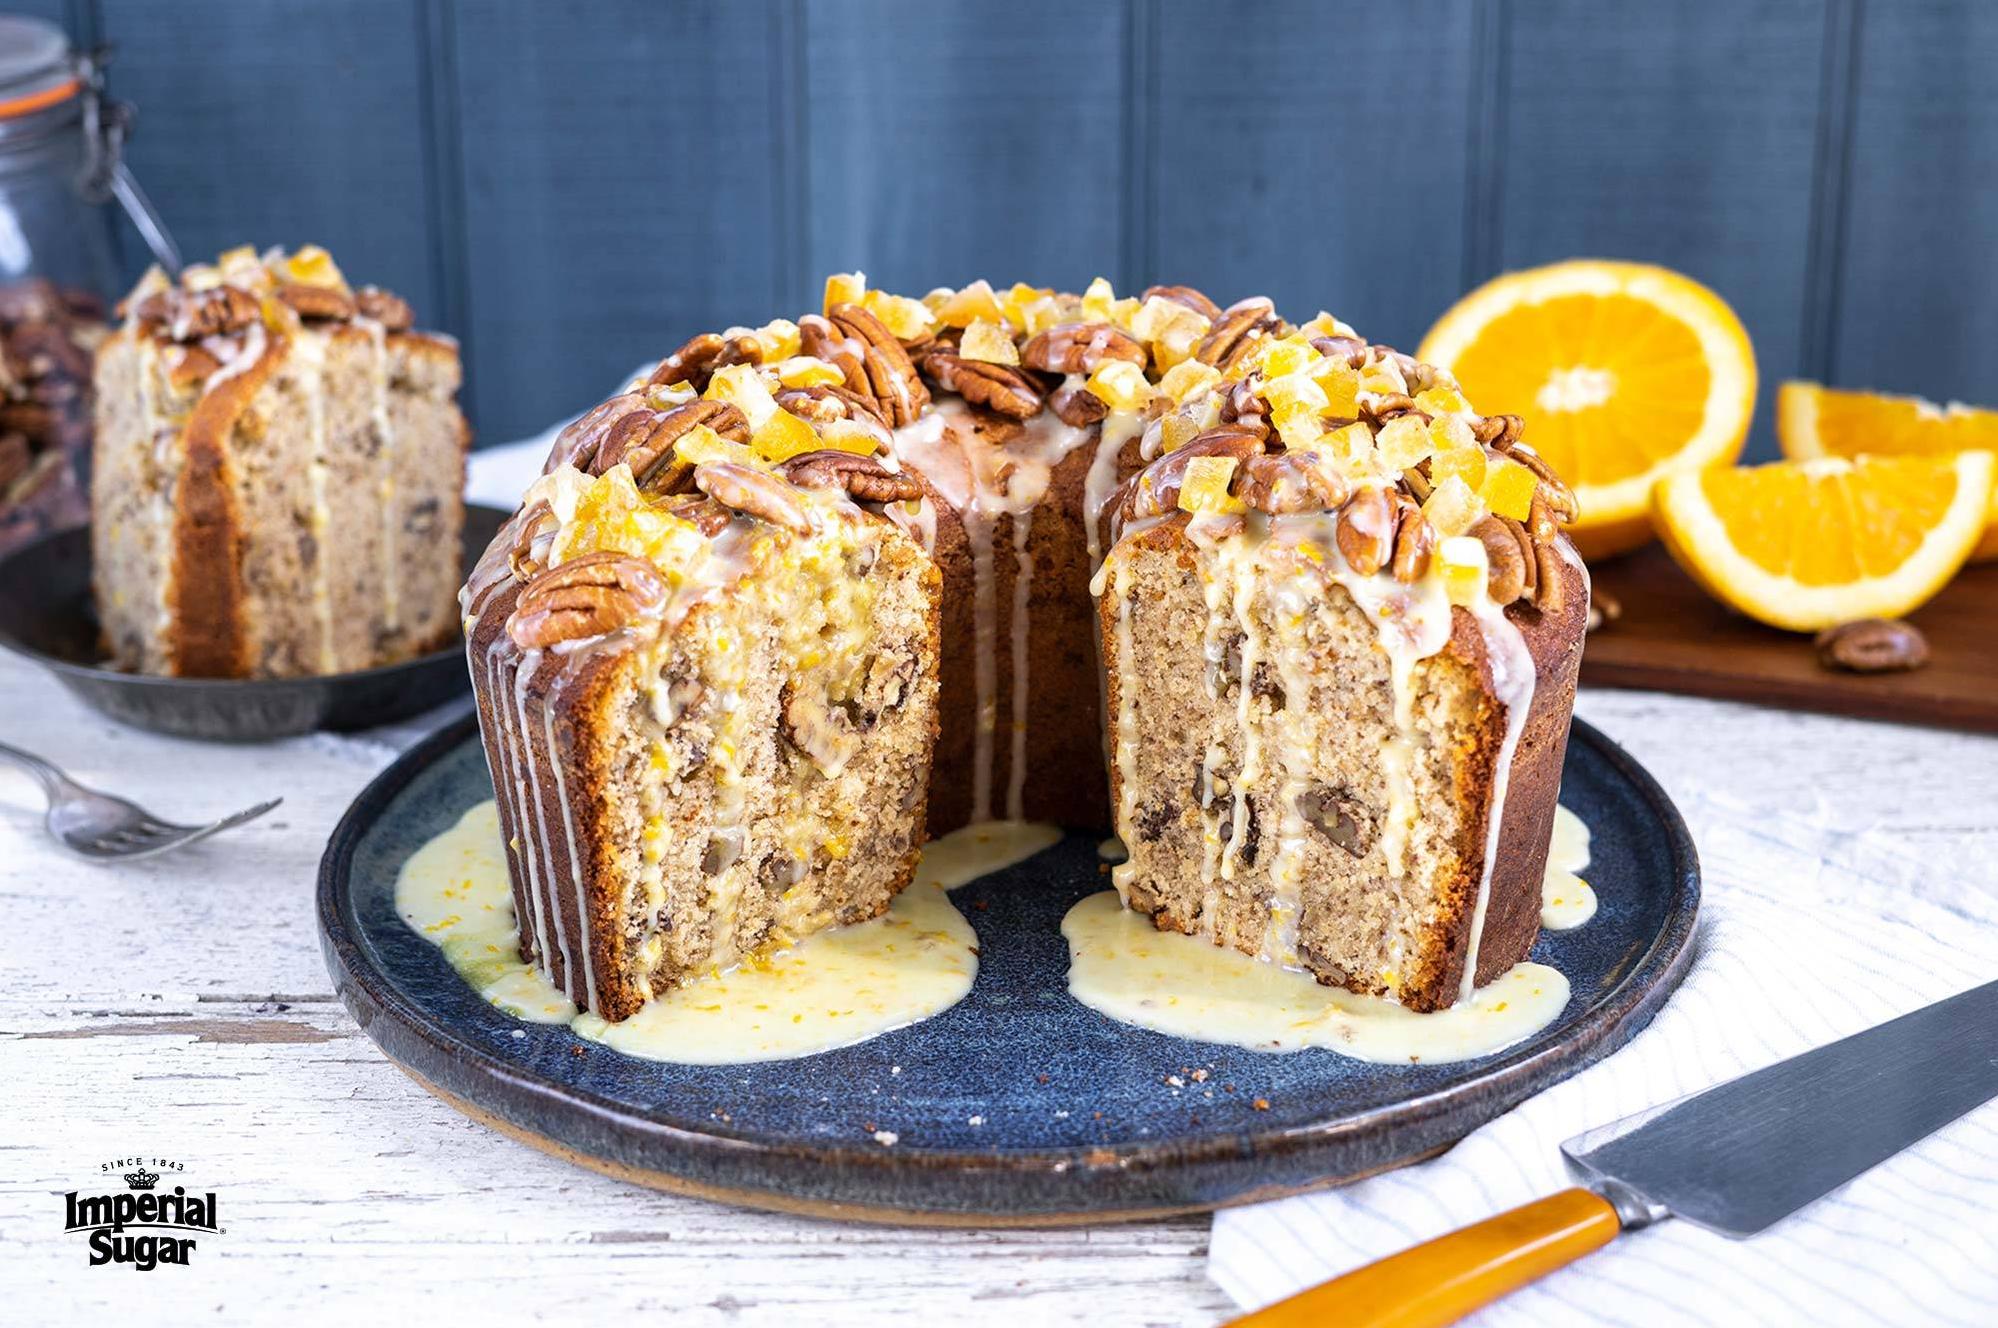  This cake is packed with the rich flavors of pecans and the bright taste of oranges.